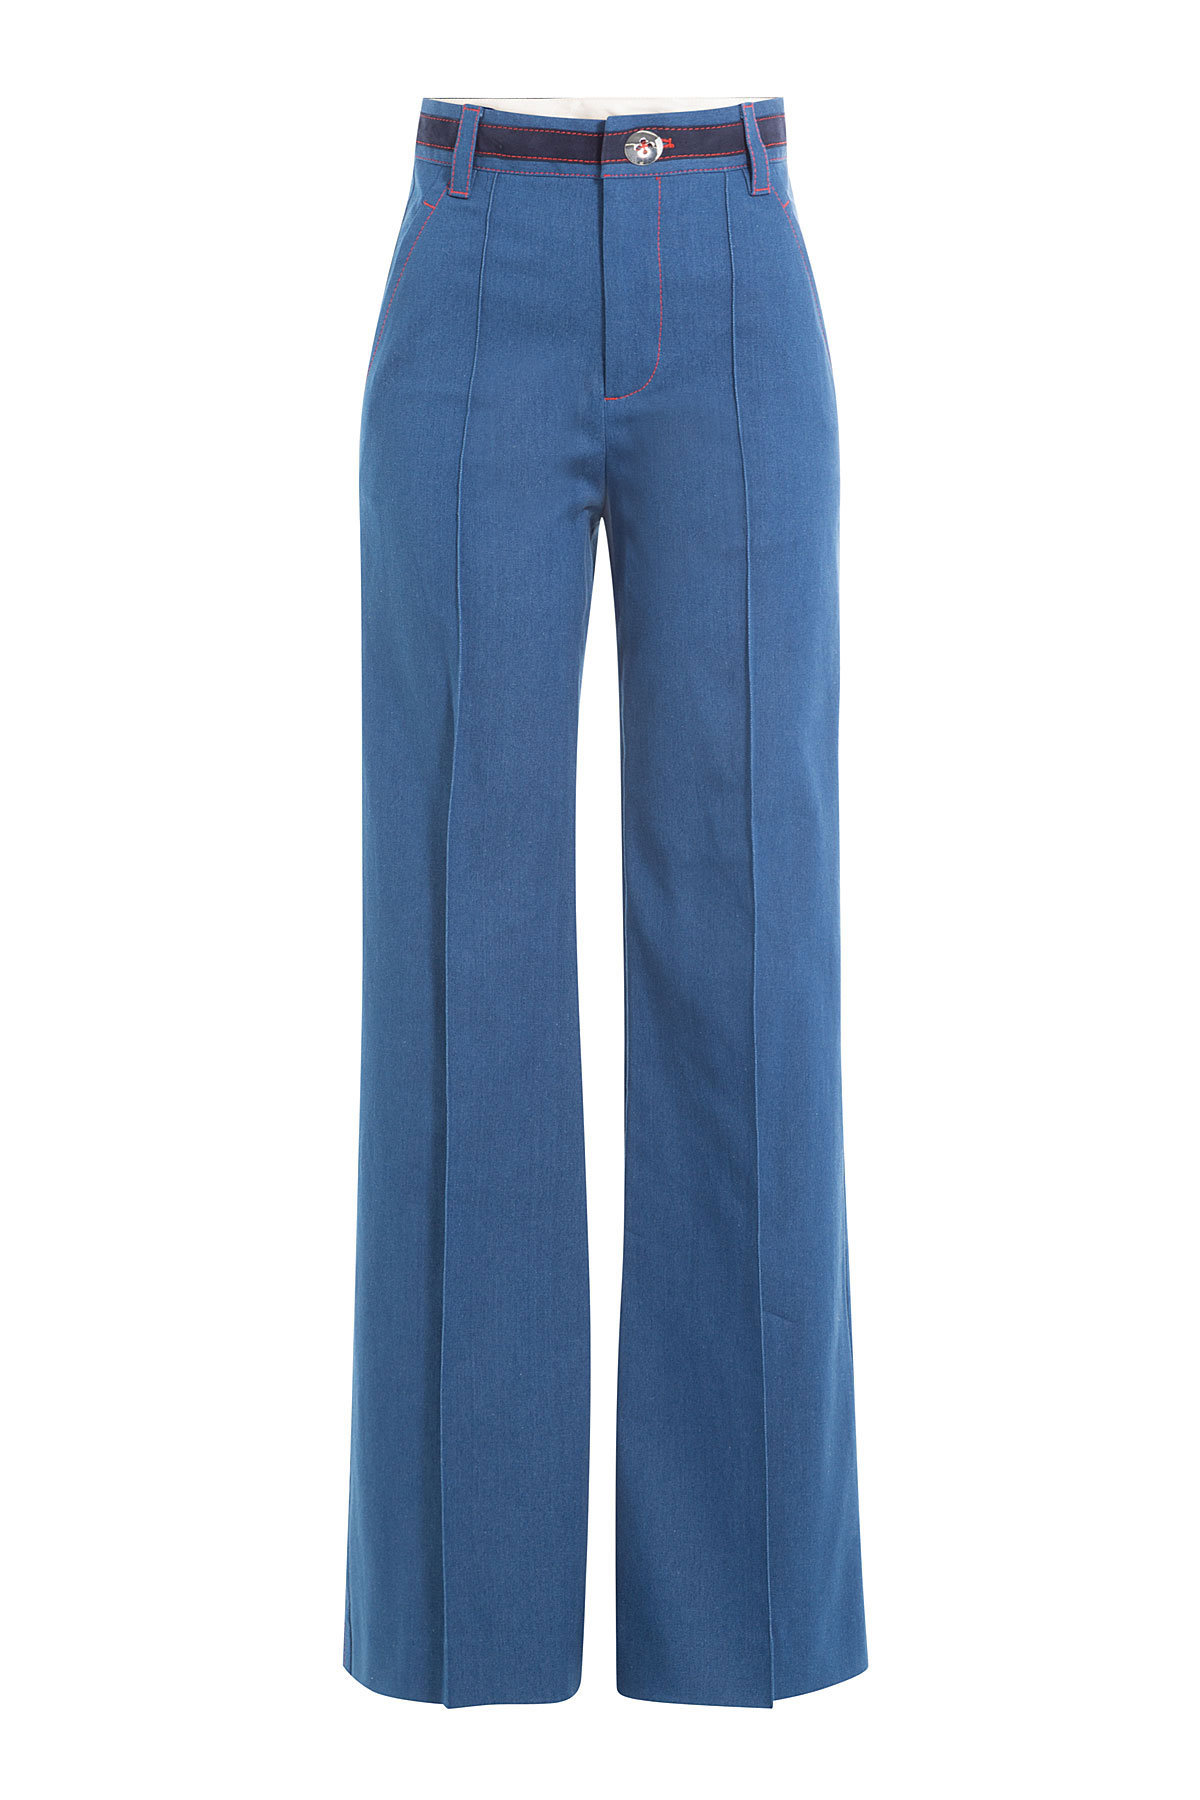 Marc Jacobs - Wide Leg Jeans with Contrast Thread